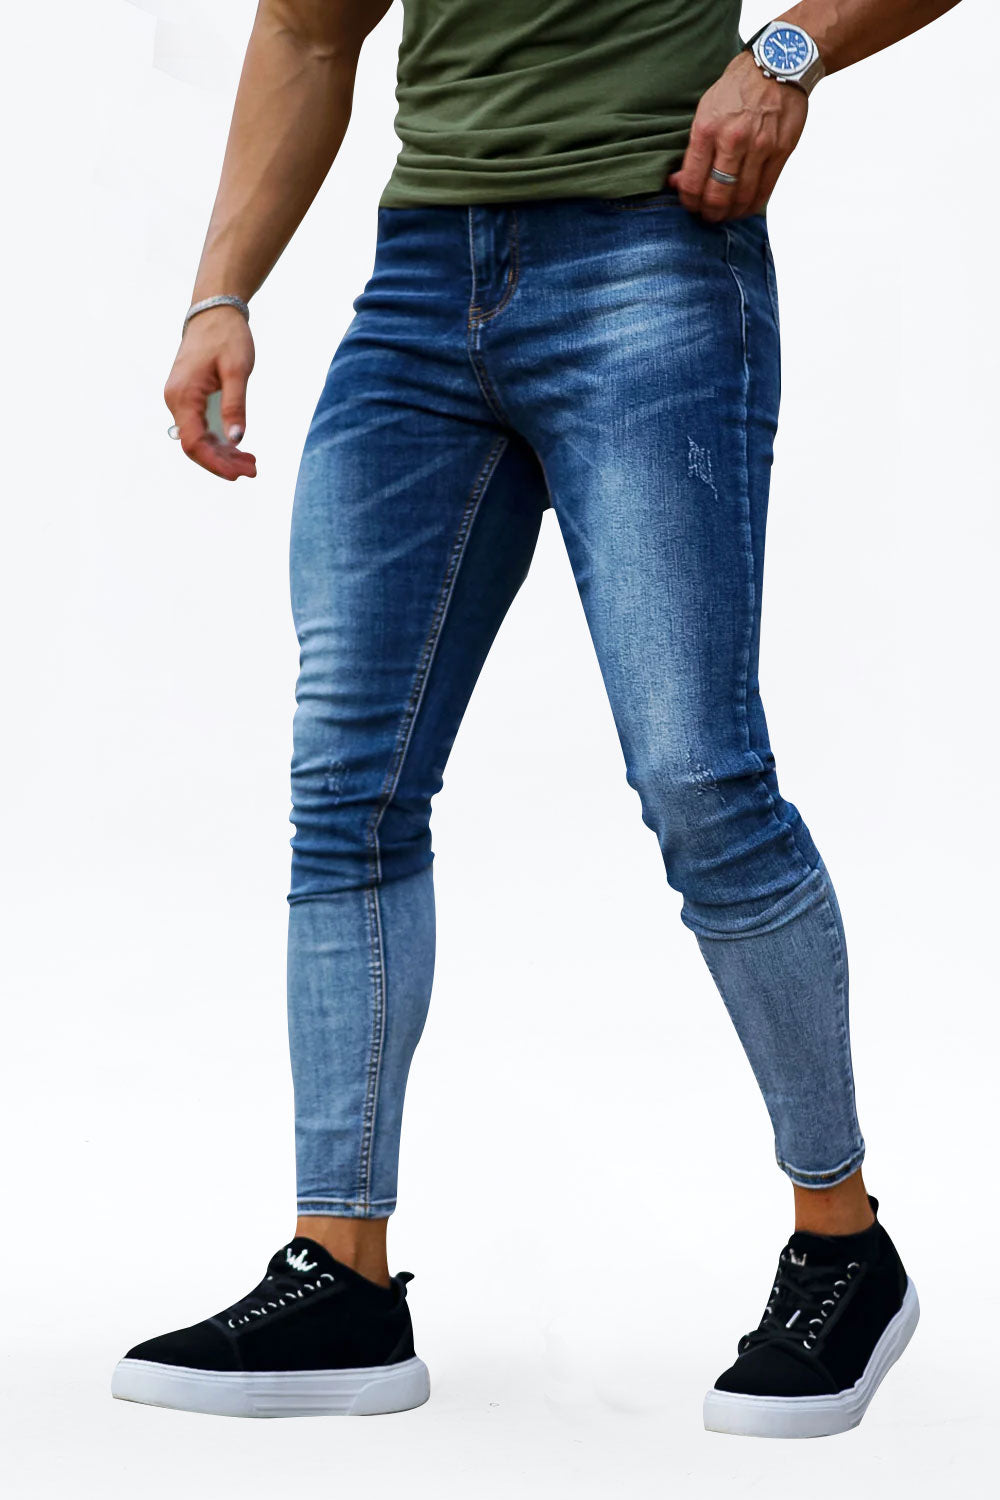 Gingtto Stylish Skinny Jeans - Blue For Sale – GINGTTO